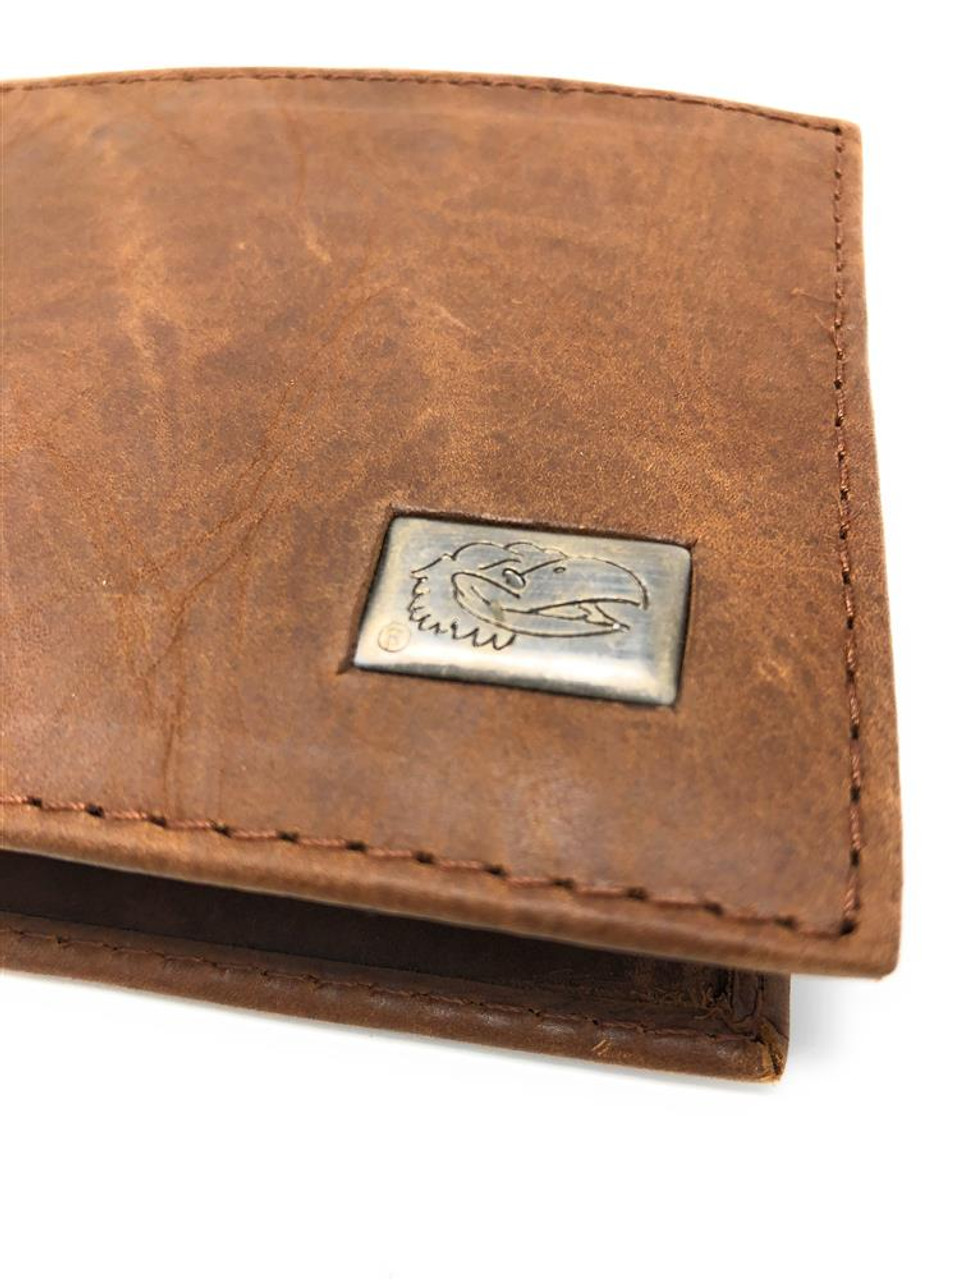 Boise State Broncos Deluxe Leather Tri-Fold Wallet